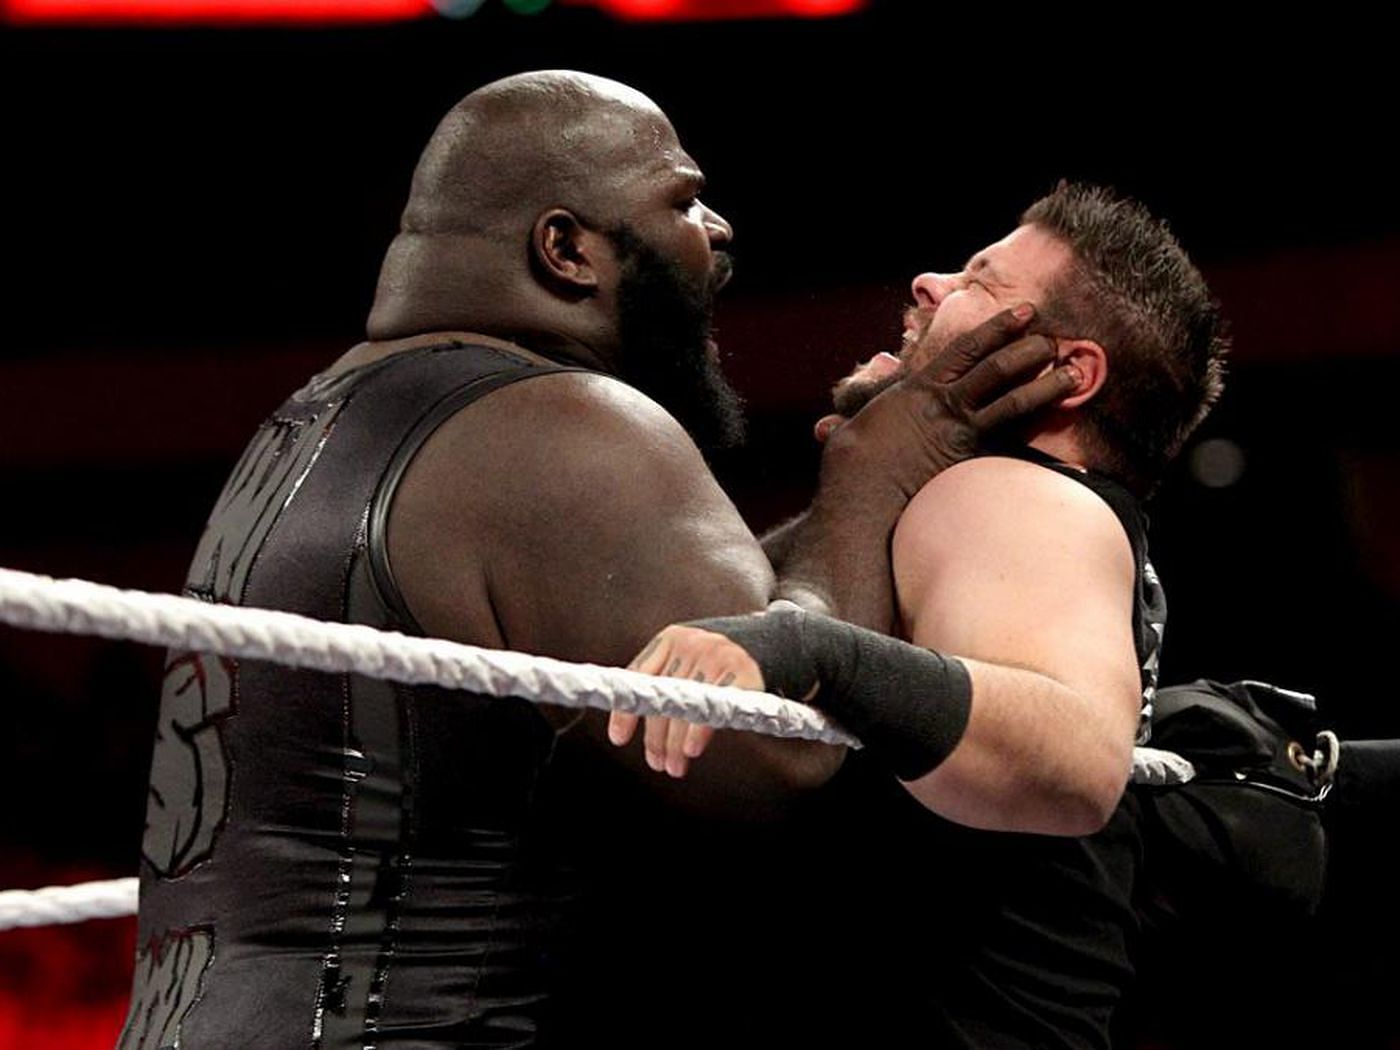 Mark Henry believes Cesaro will show up sometime